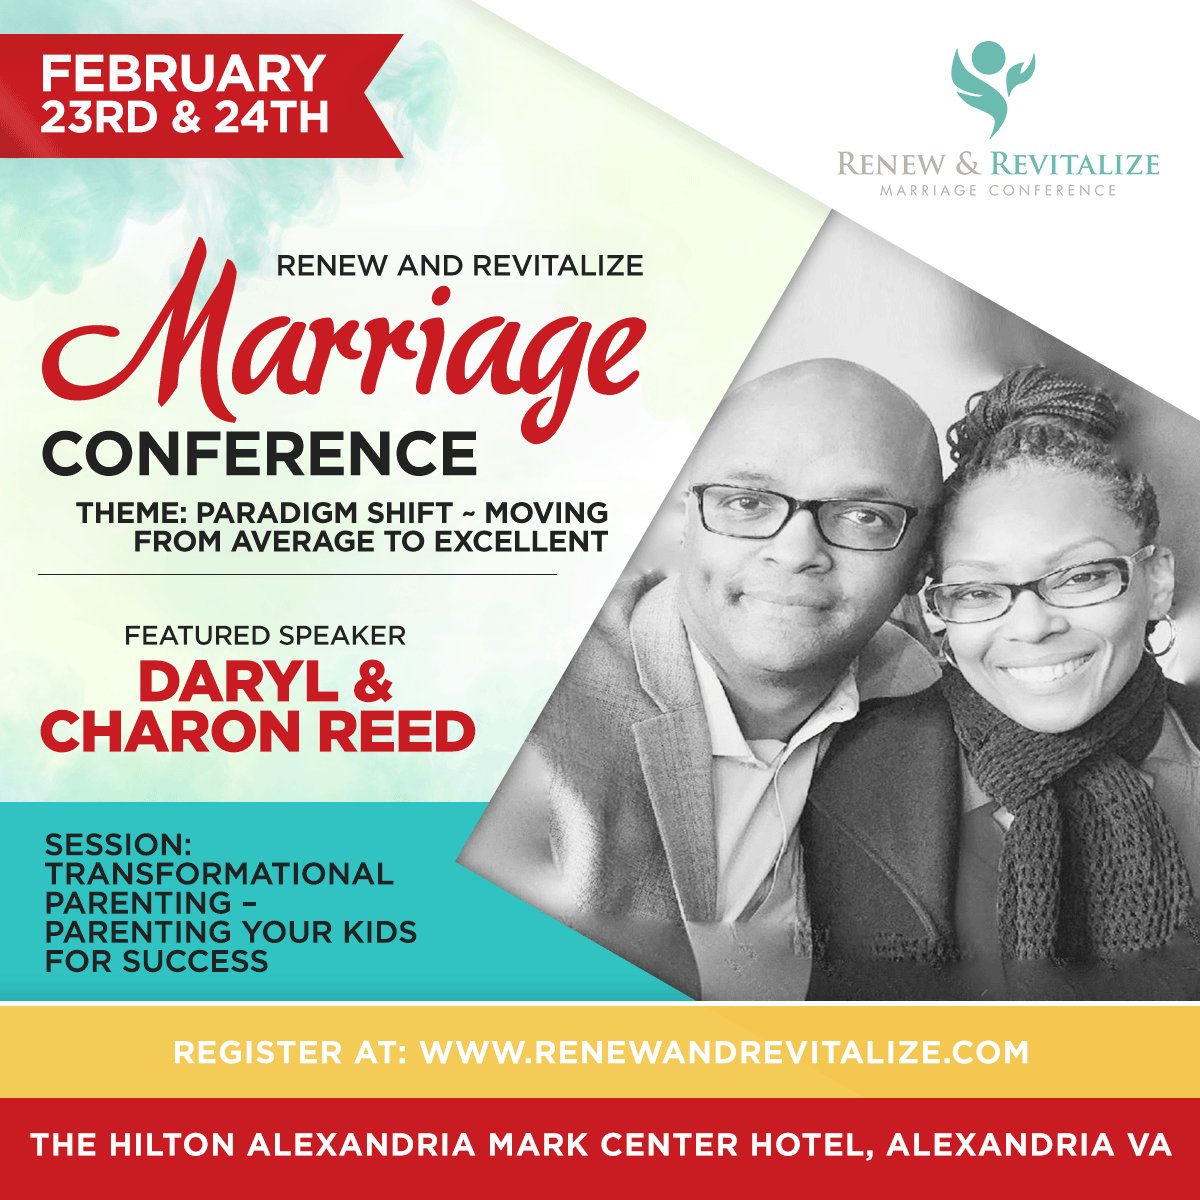 Honored and blessed to have Pastor @DarylRReed and @MsCharonReed as featured speakers!  If you are married with children, this session will equip you with practical and proven principles to transform your parenting! (Register now!)
Renewandrevitalize.com #raisingsuccessfulkids